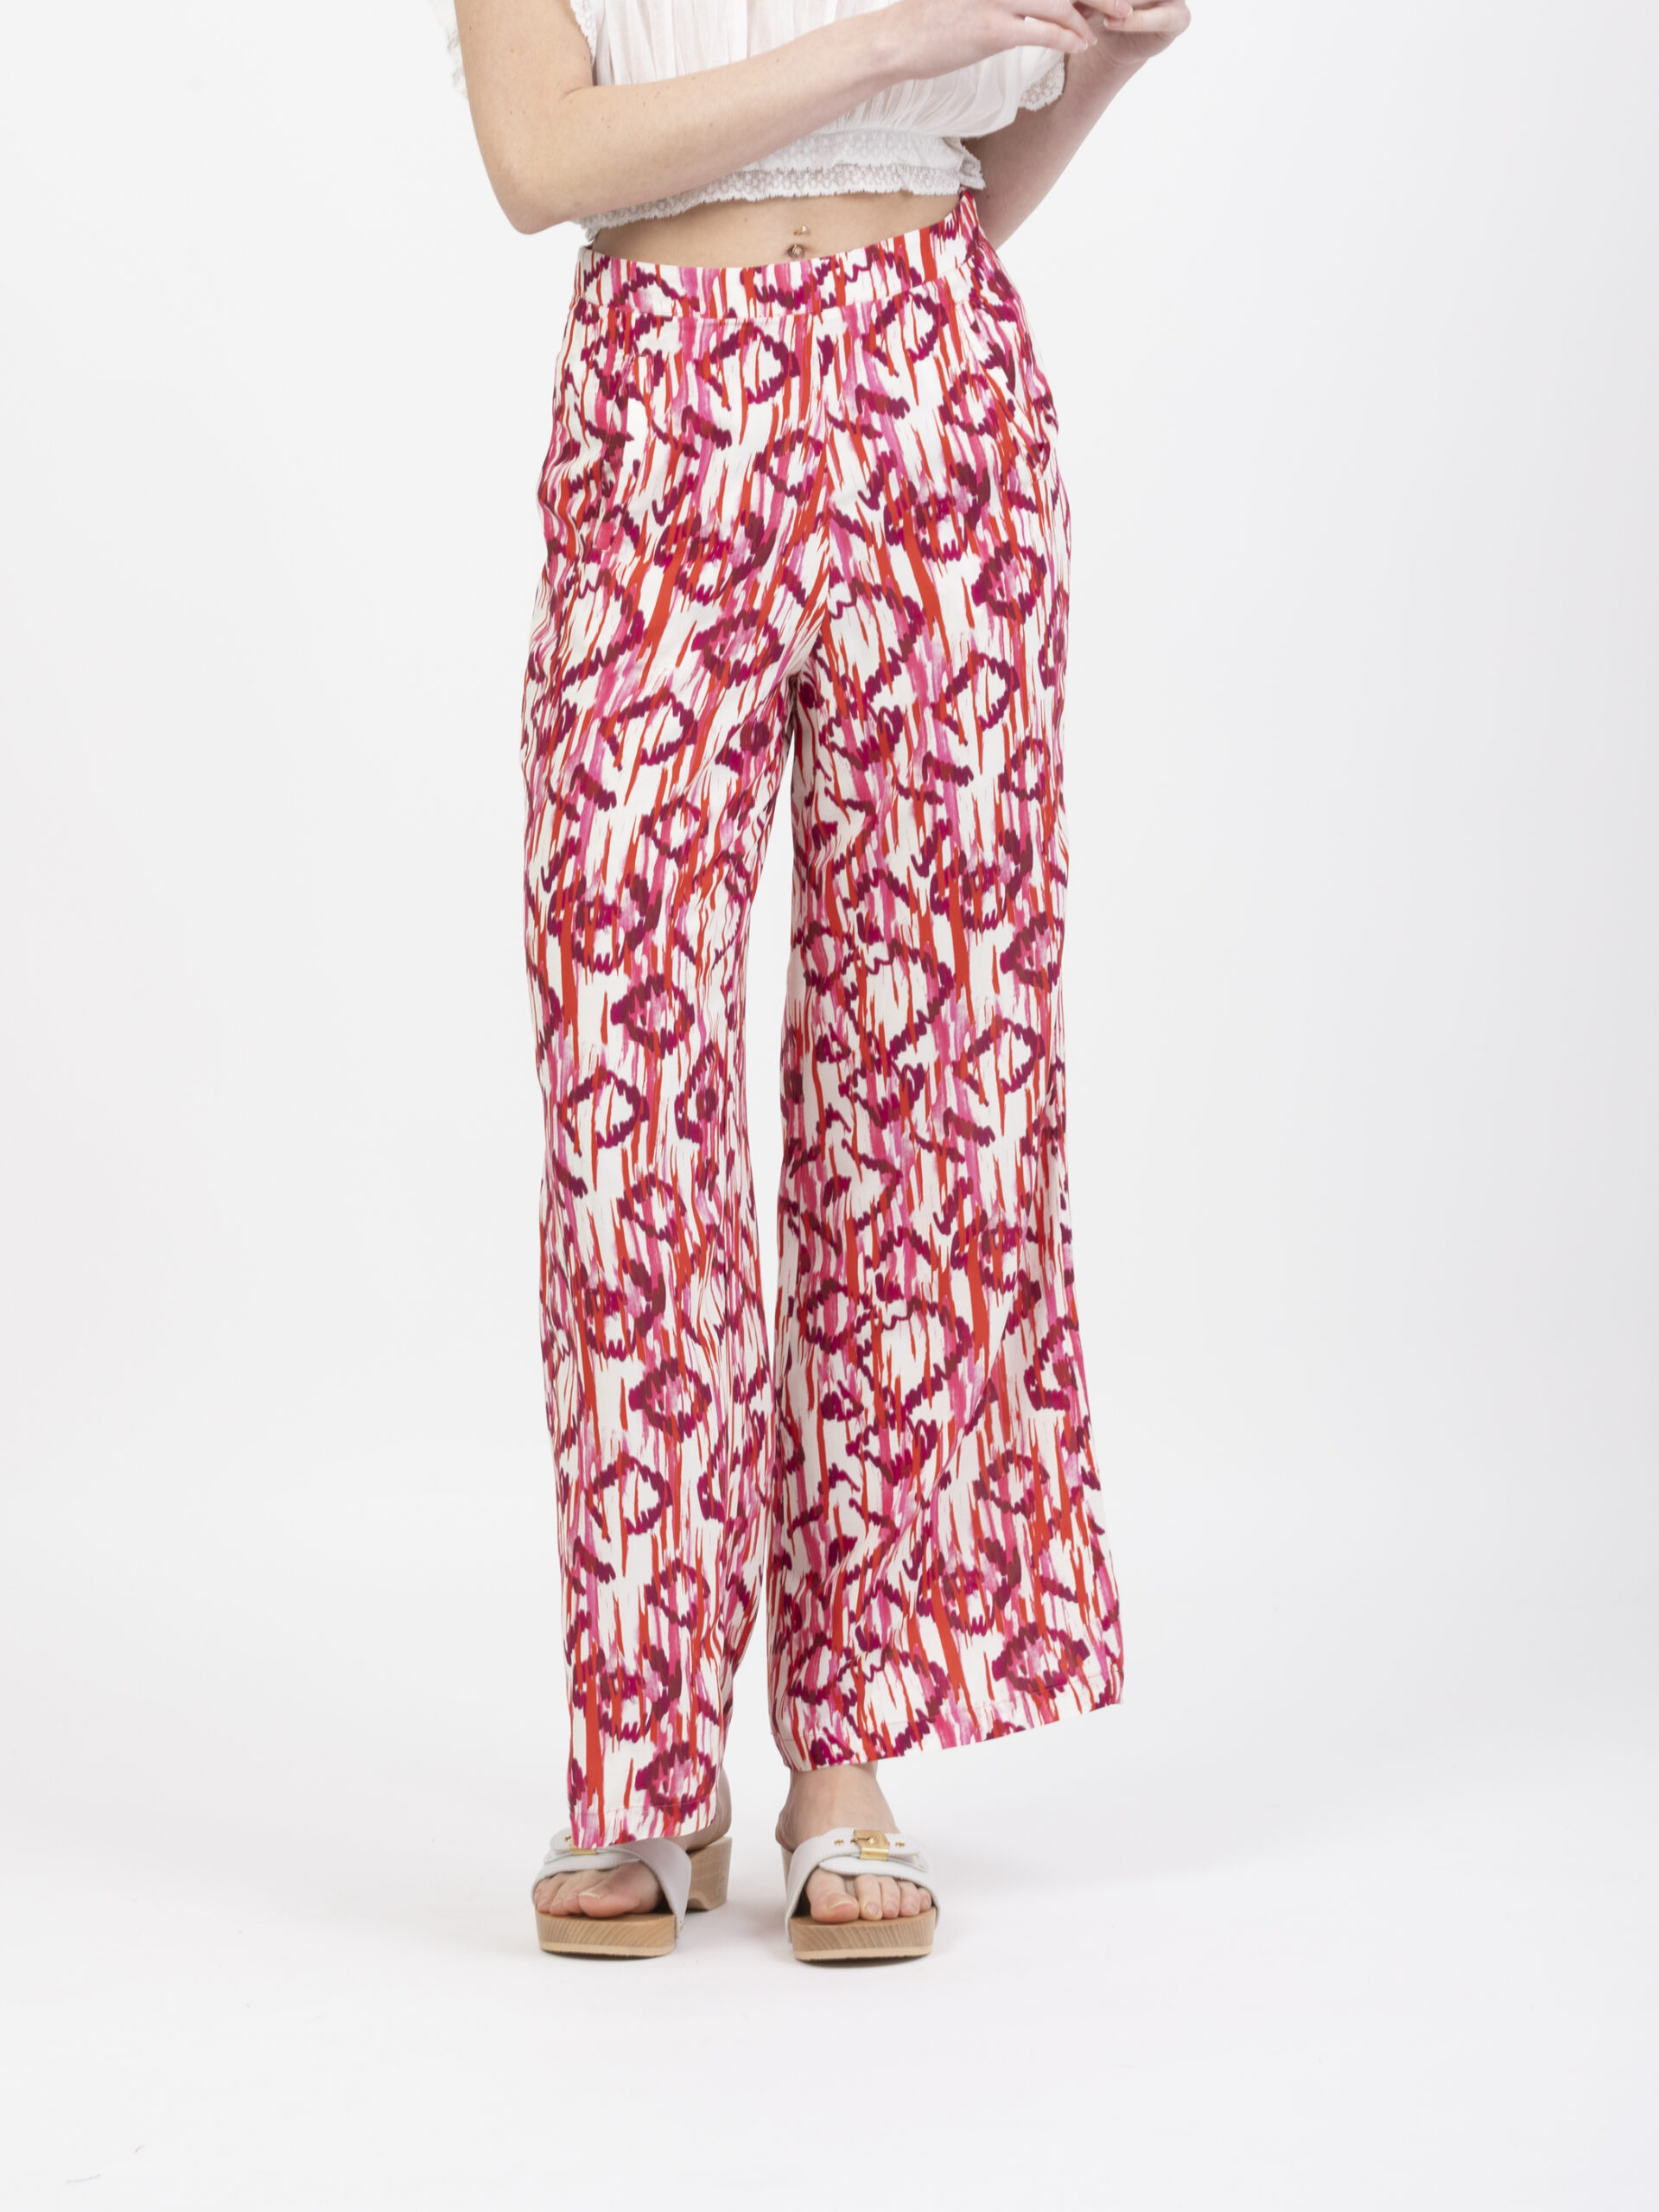 sienna-uniforme-athens-loose-trousers-african-print-matchbox-athens-boutique-buy